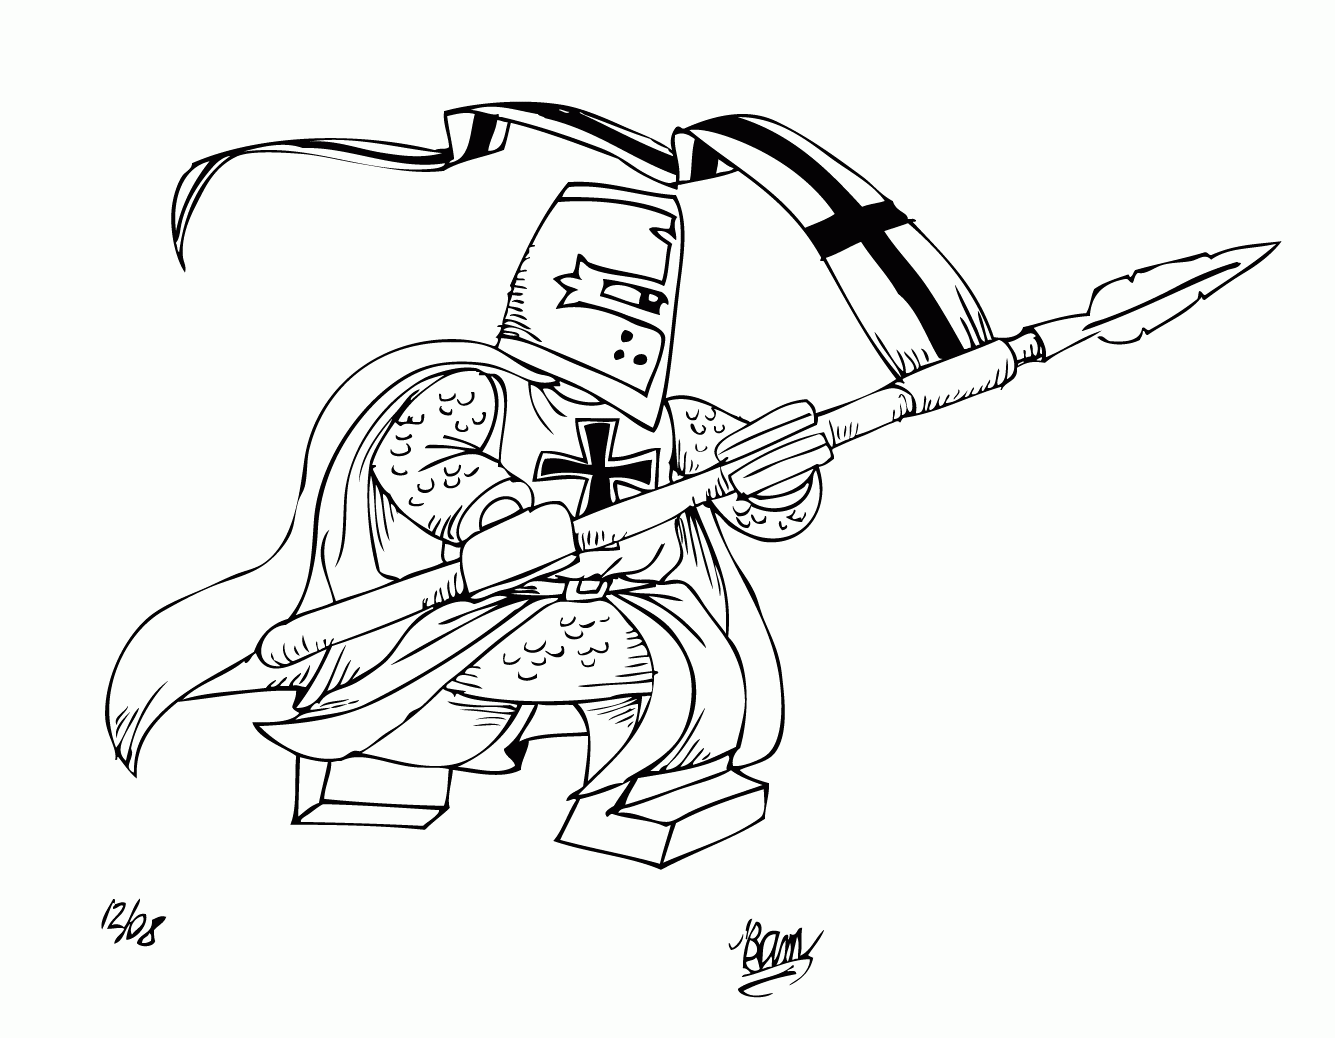 Classic-Castle.com • View topic - Minifigure Art by Hound Knight